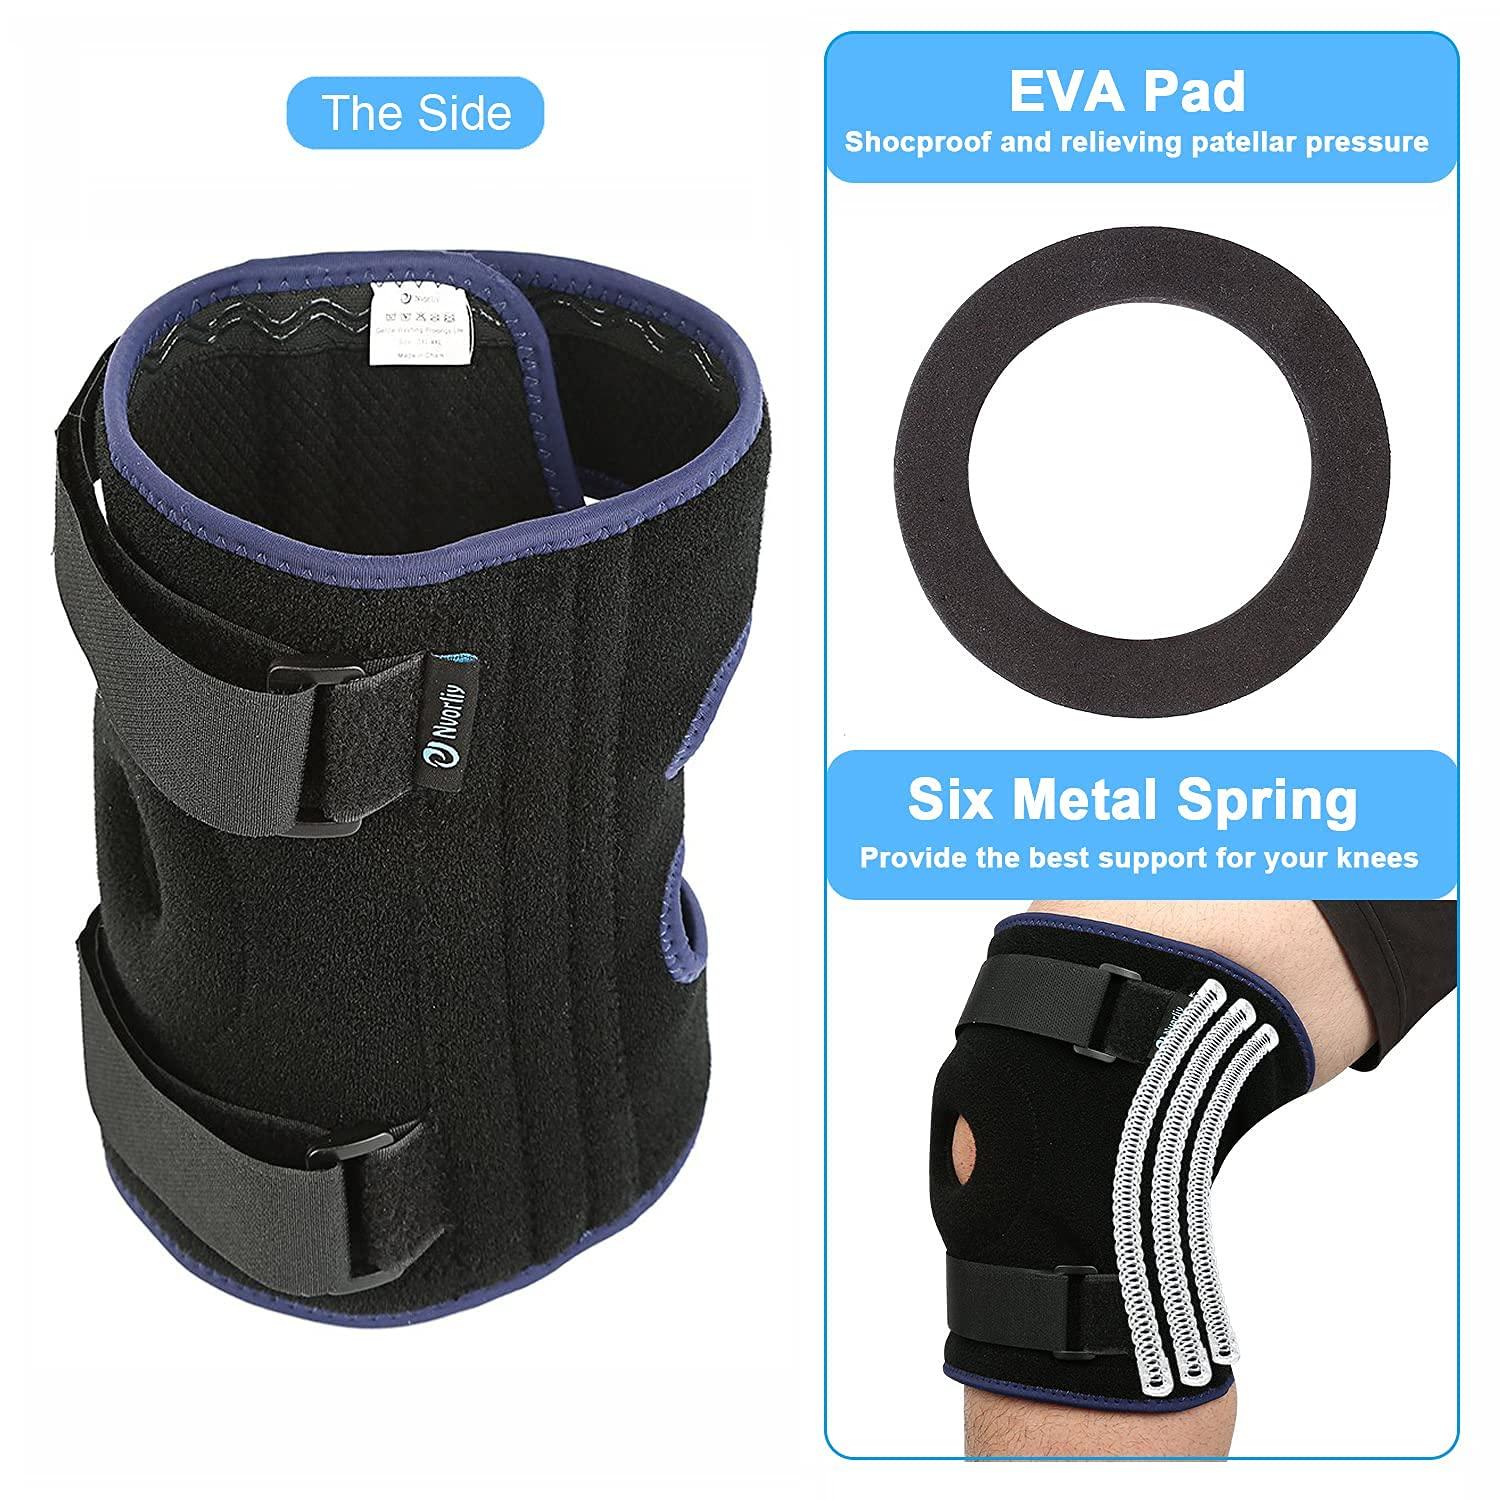 Nvorliy Plus Size Knee Brace XL-8XL Extra Large Open-Patella Stabilizer  Breathable Neoprene Support For Arthritis, Acl, Running, Pain Relief,  Meniscus Tear, Post-Surgery Recovery (5XL/6XL)